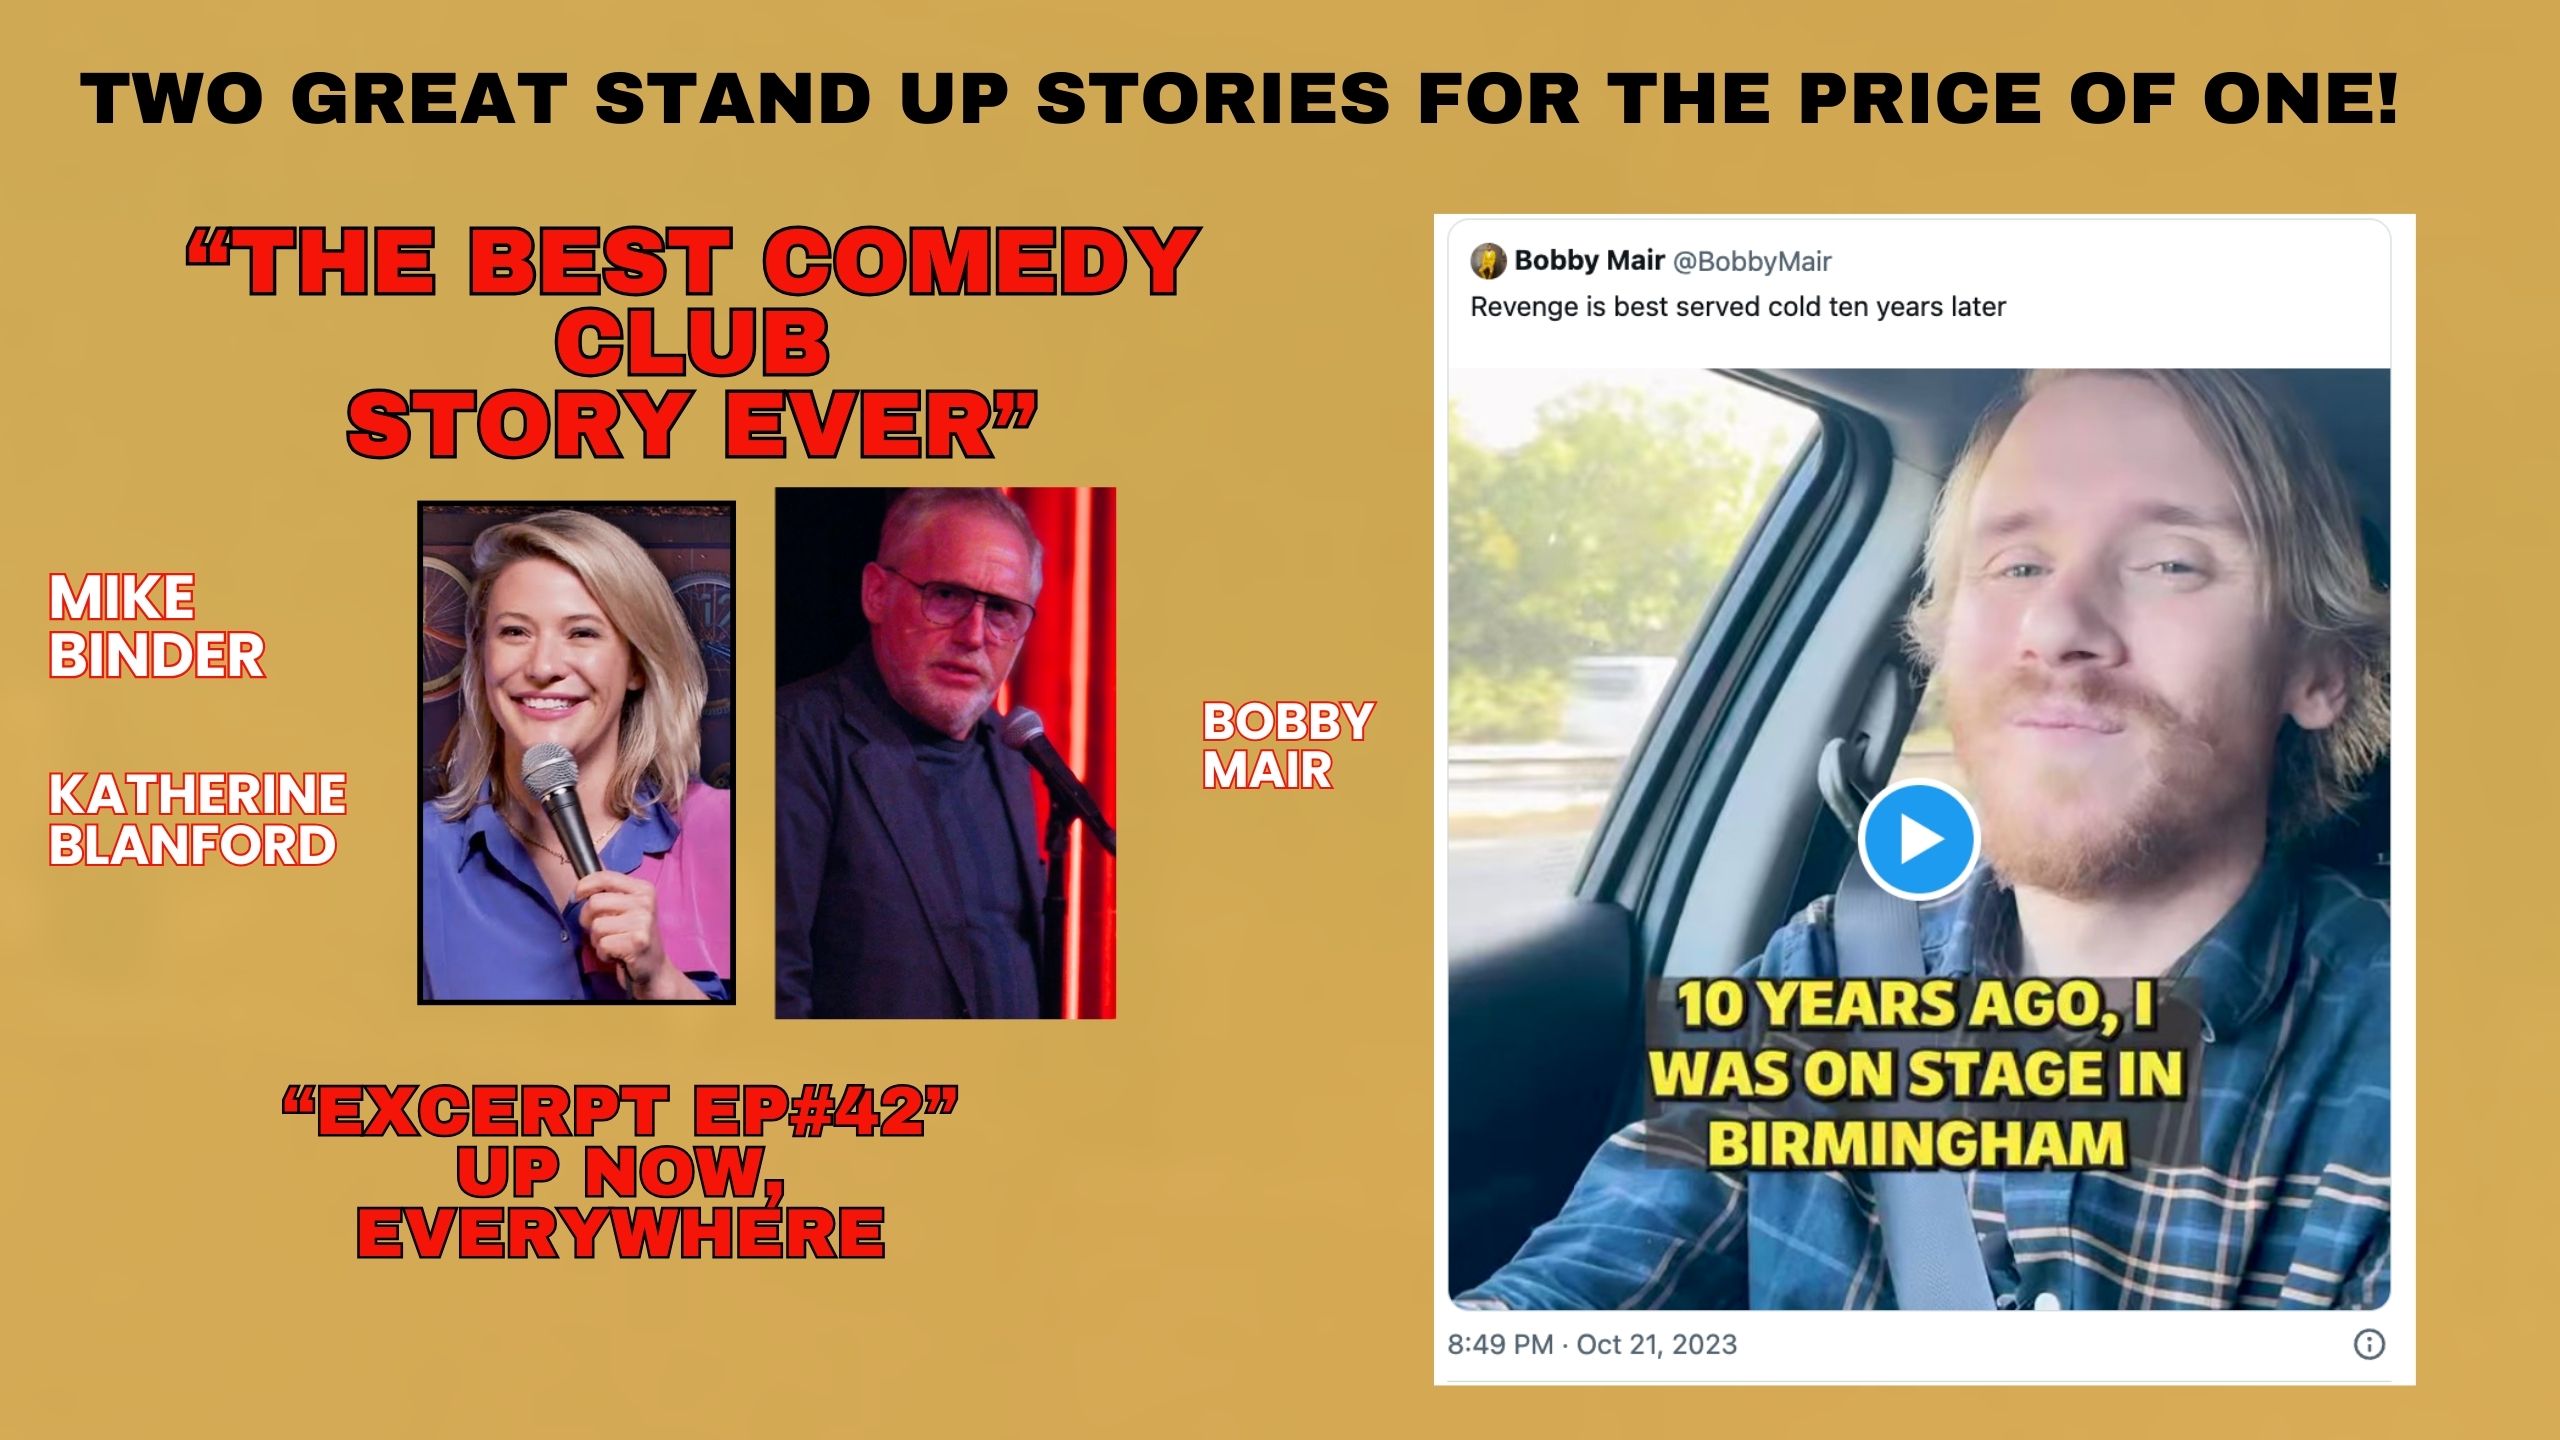 Featured image for “TWO GREAT STAND UP COMEDY STORIES FOR THE PRICE OF ONE”